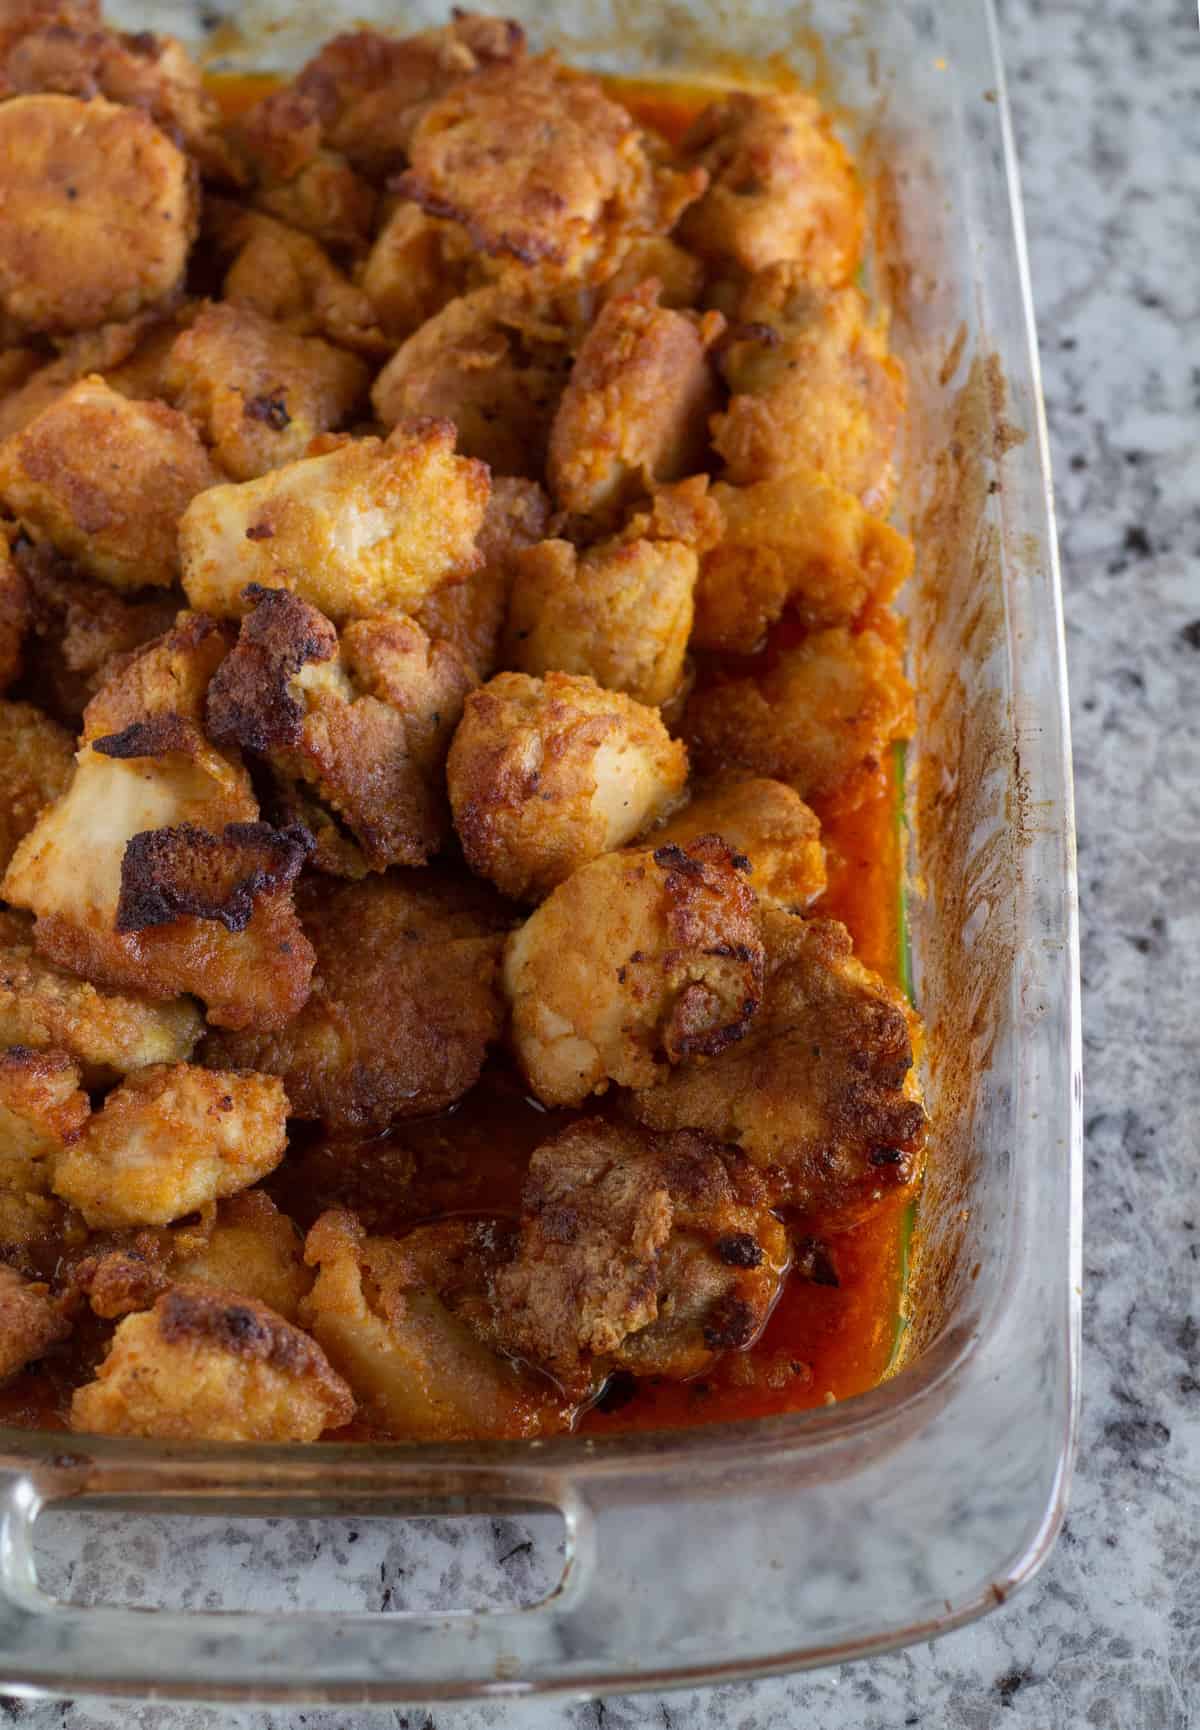 Baked sweet and sour chicken in large baking dish